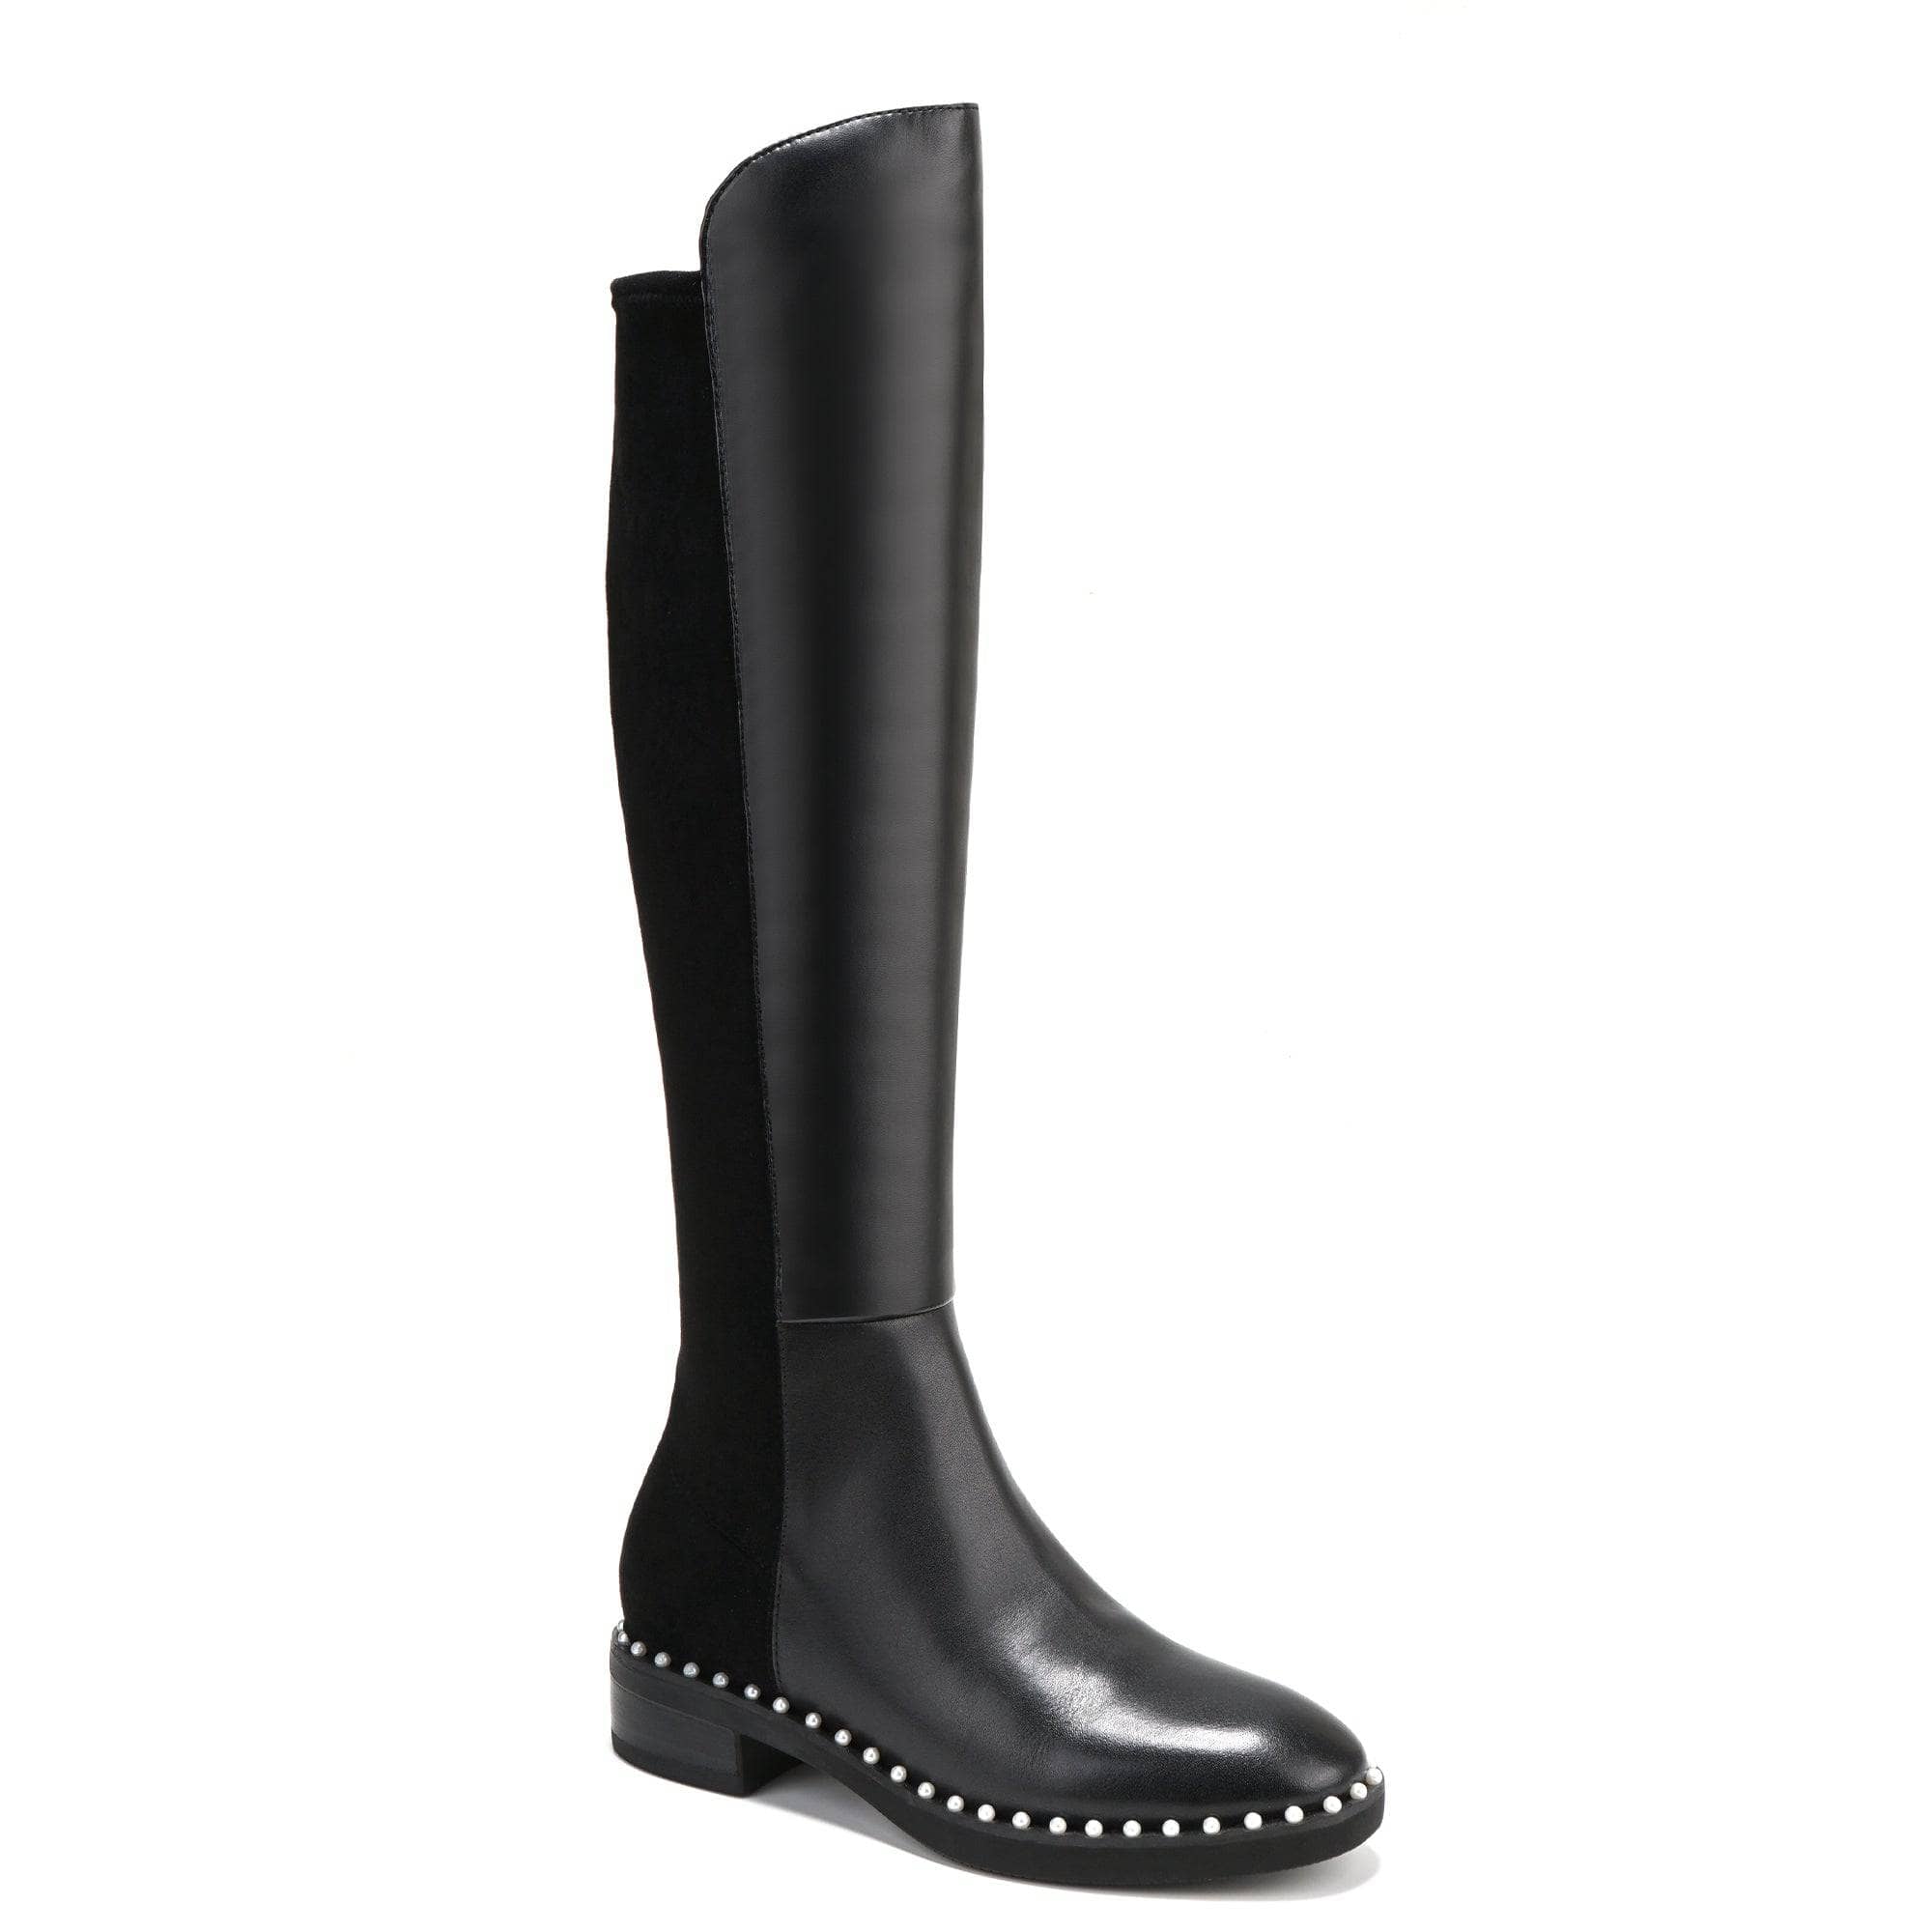 UGG Arsen Over the Knee Boots